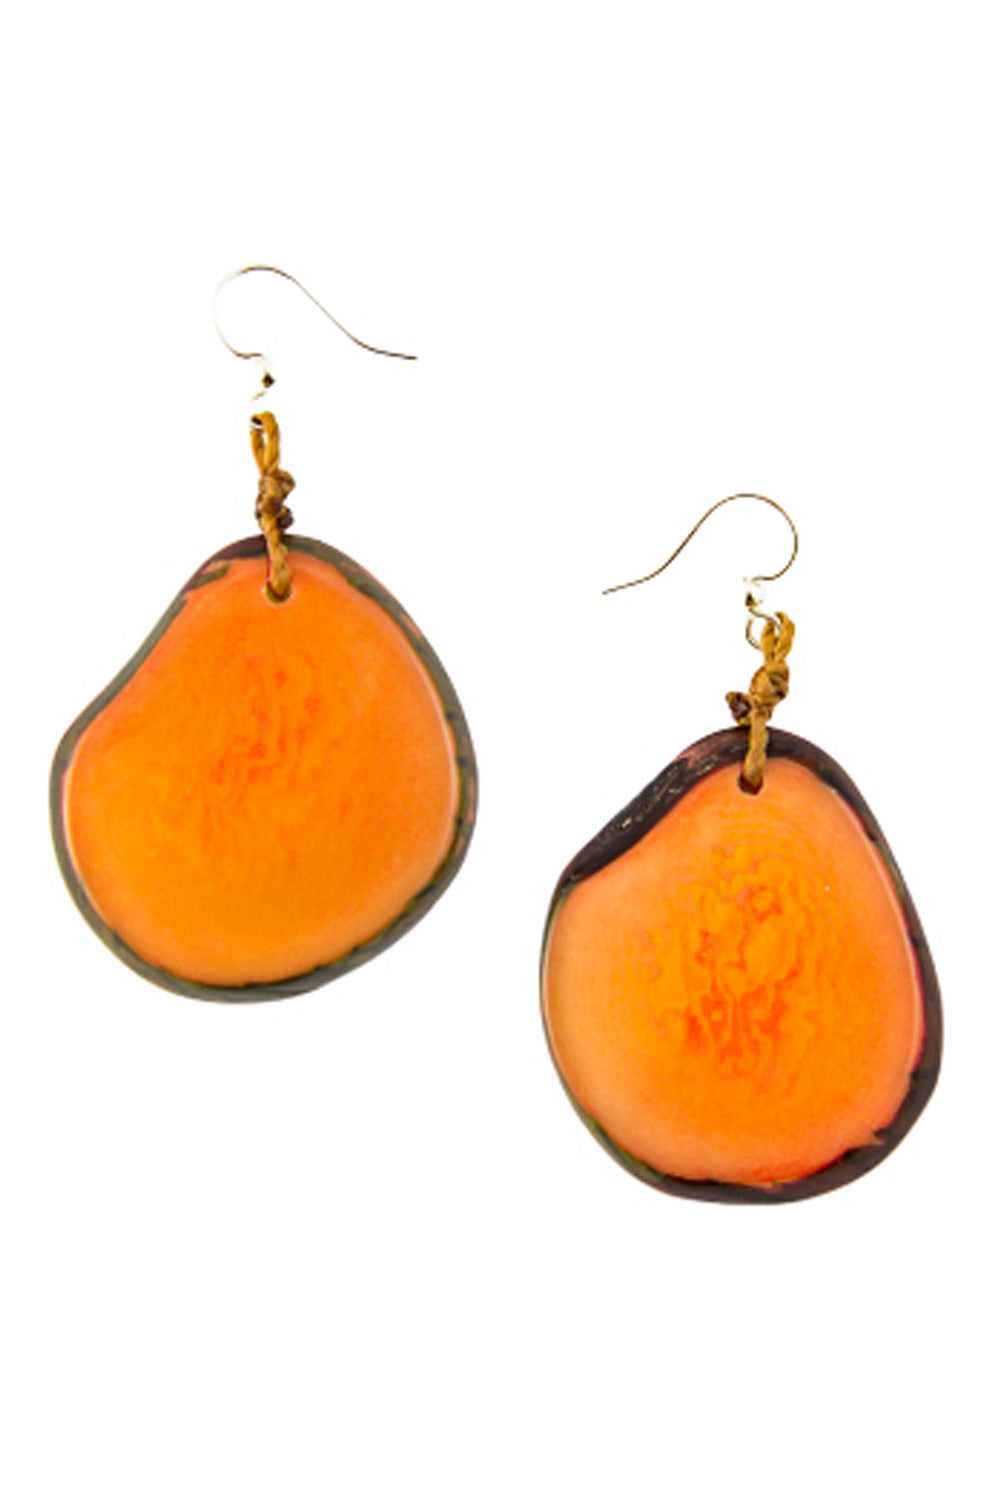 Organic Tague Jewelry (1E250) Drop earrings made from organic tagua nut slices in orange